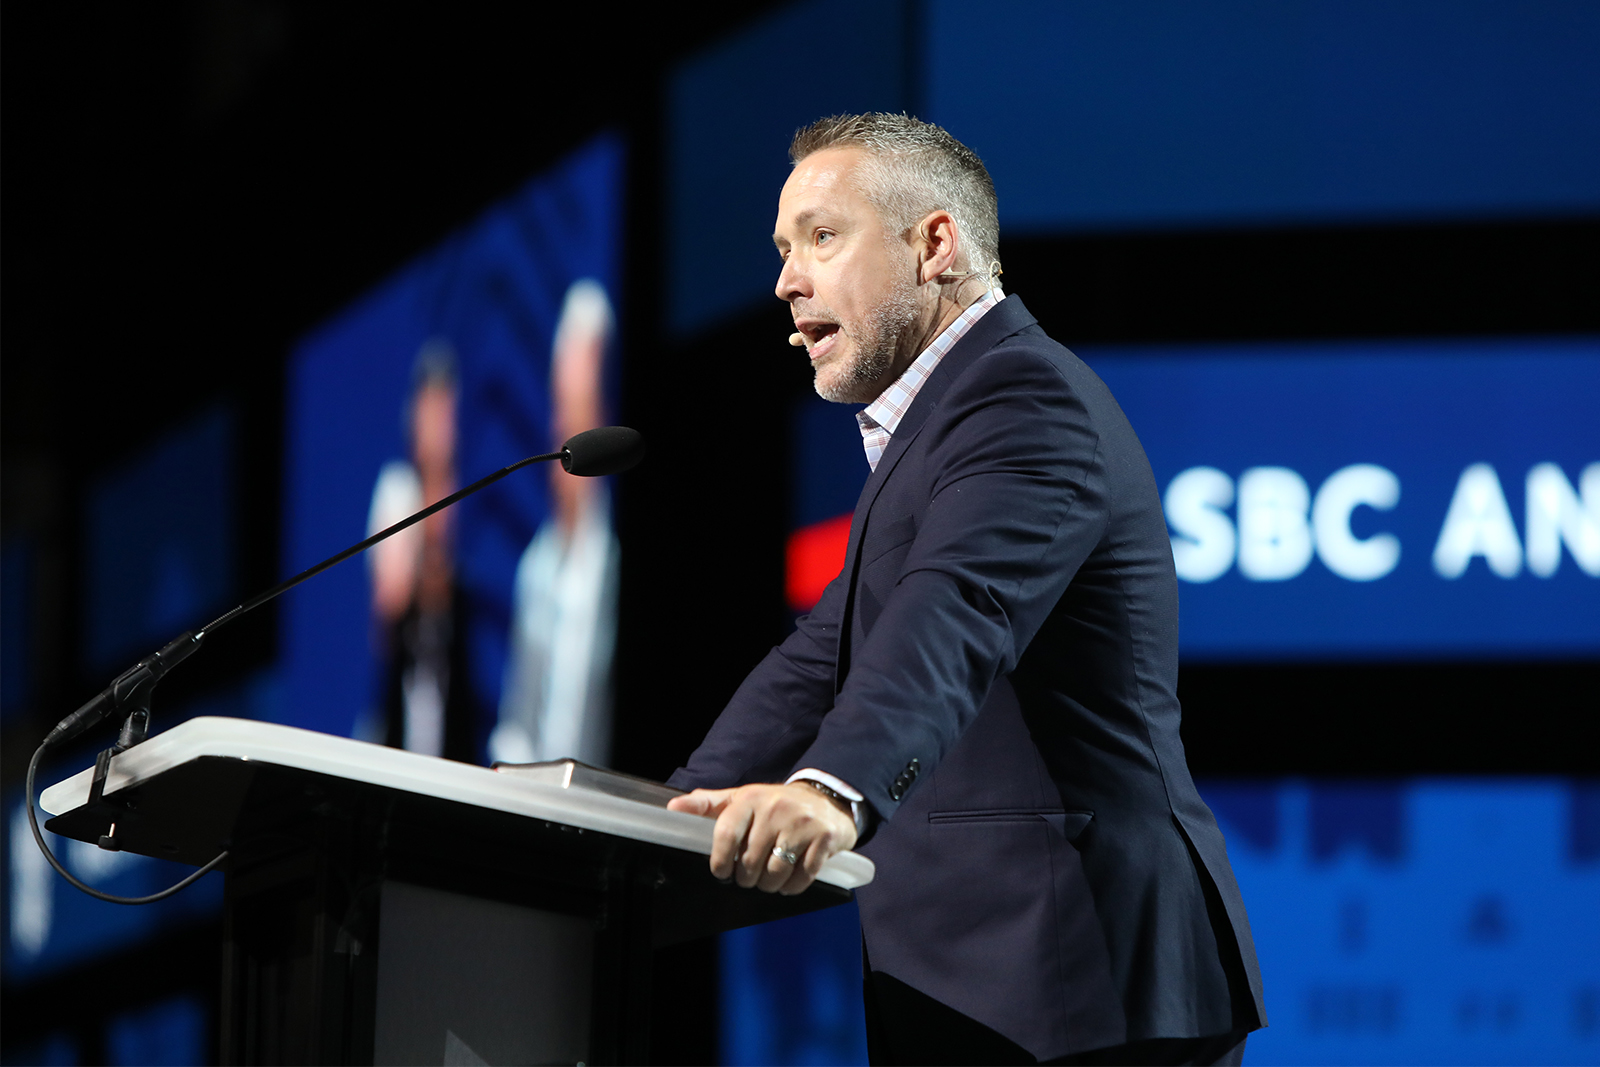 Southern Baptist Convention President J.D. Greear addresses the annual meeting at the Music City Center, June 15, 2021, in Nashville, Tennessee. RNS photo by Kit Doyle